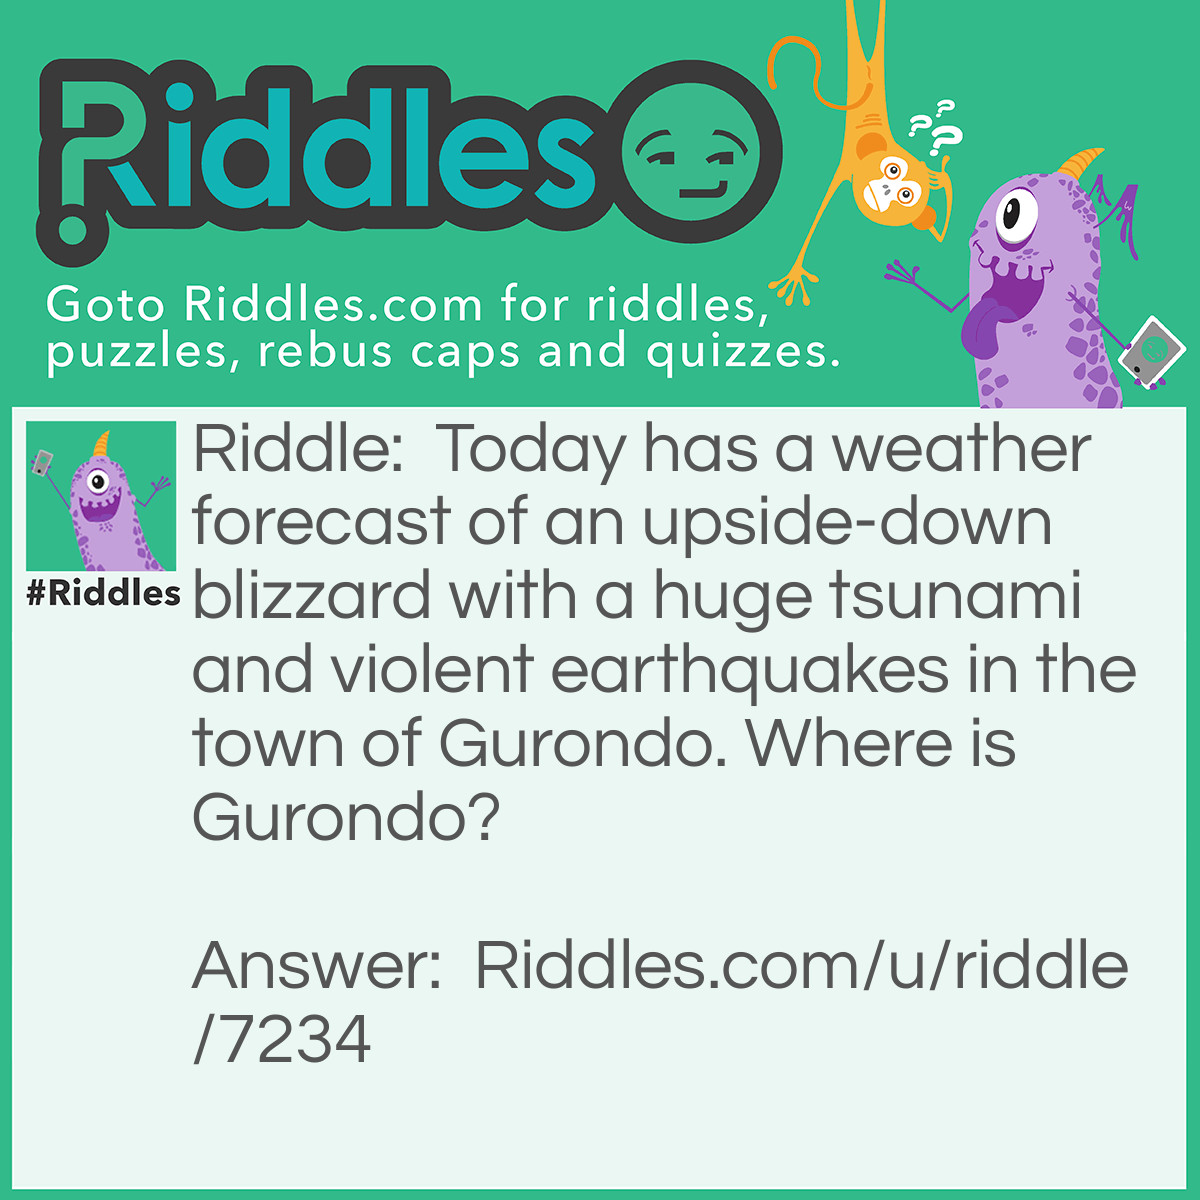 Riddle: Today has a weather forecast of an upside-down blizzard with a huge tsunami and violent earthquakes in the town of Gurondo. Where is Gurondo? Answer: Gurondo is inside a snowglobe.